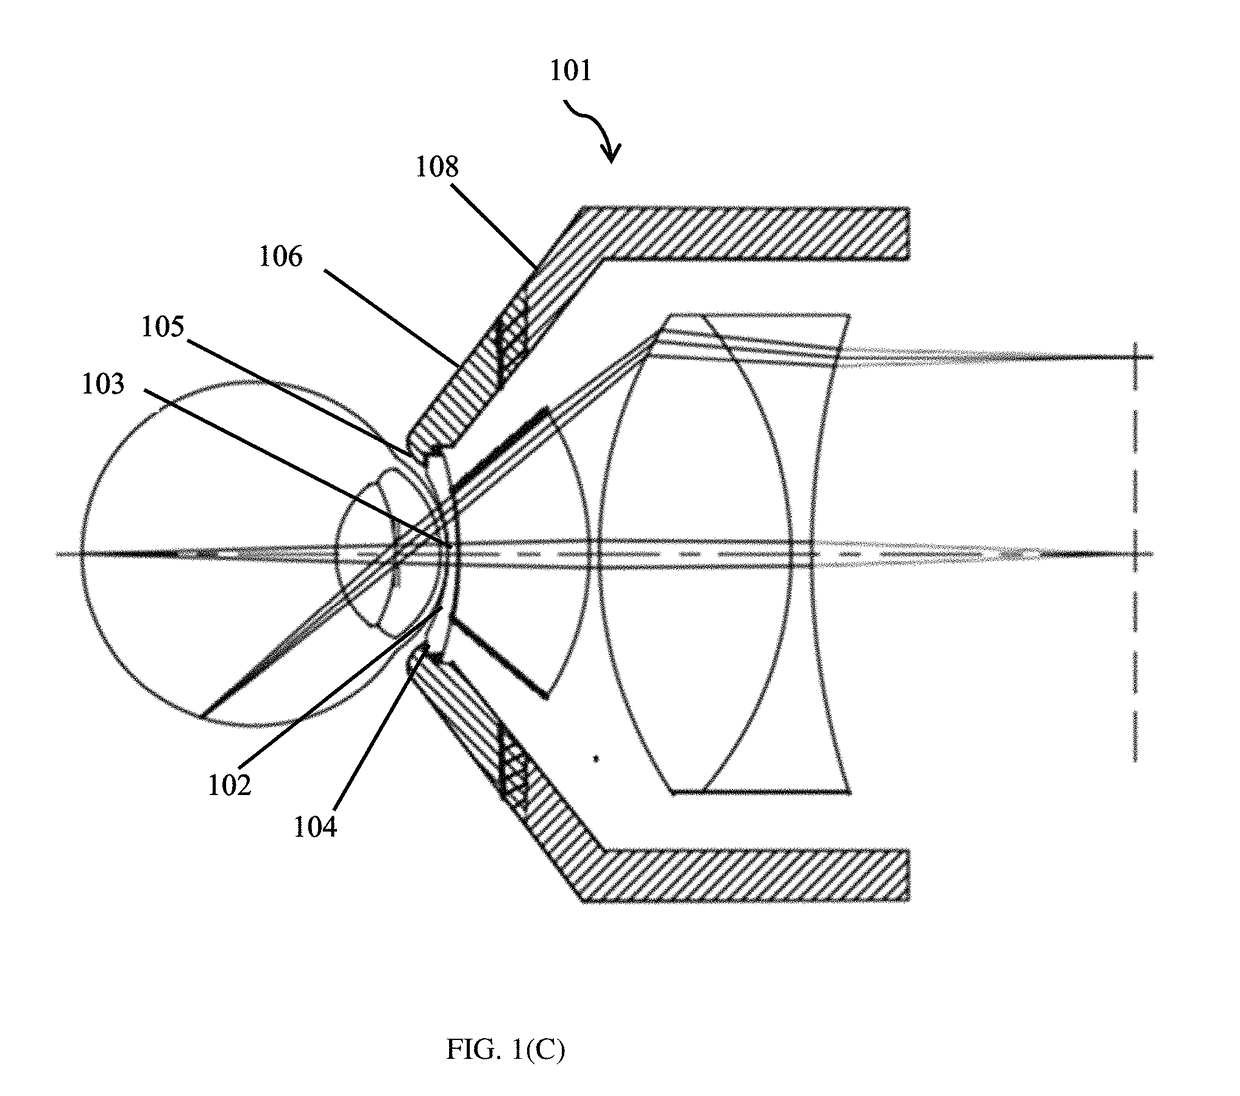 Disposable cap for an eye imaging apparatus and related methods